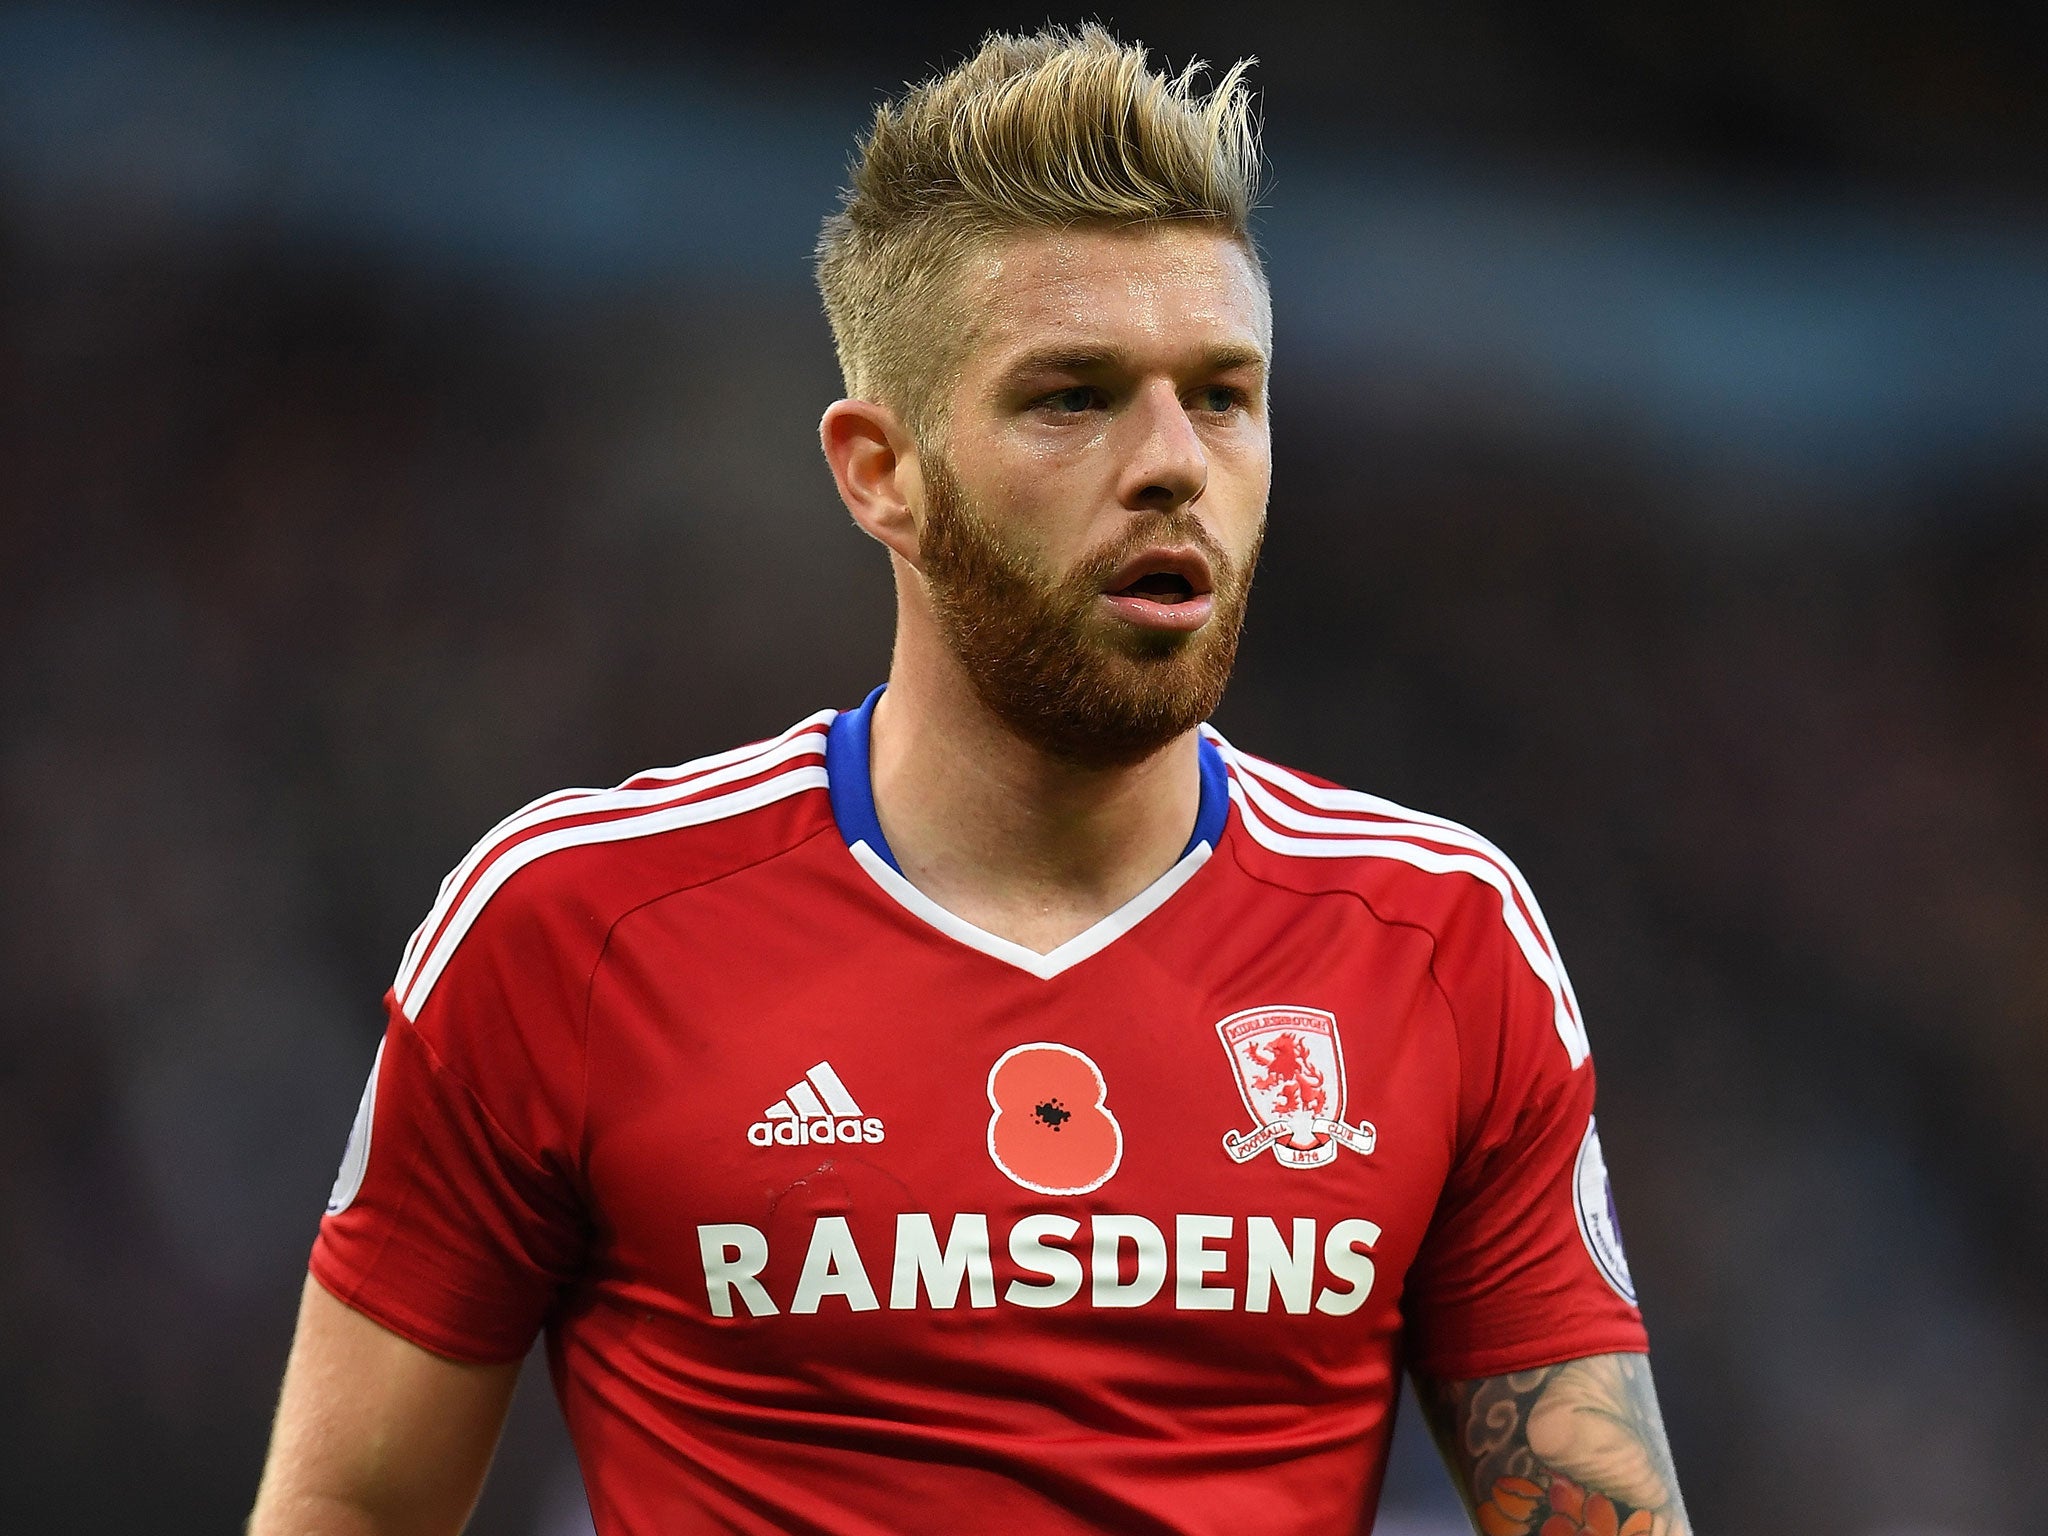 Middlesbrough midfielder Adam Clayton feels a sense of pride in dropping down the leagues to reach the top flight